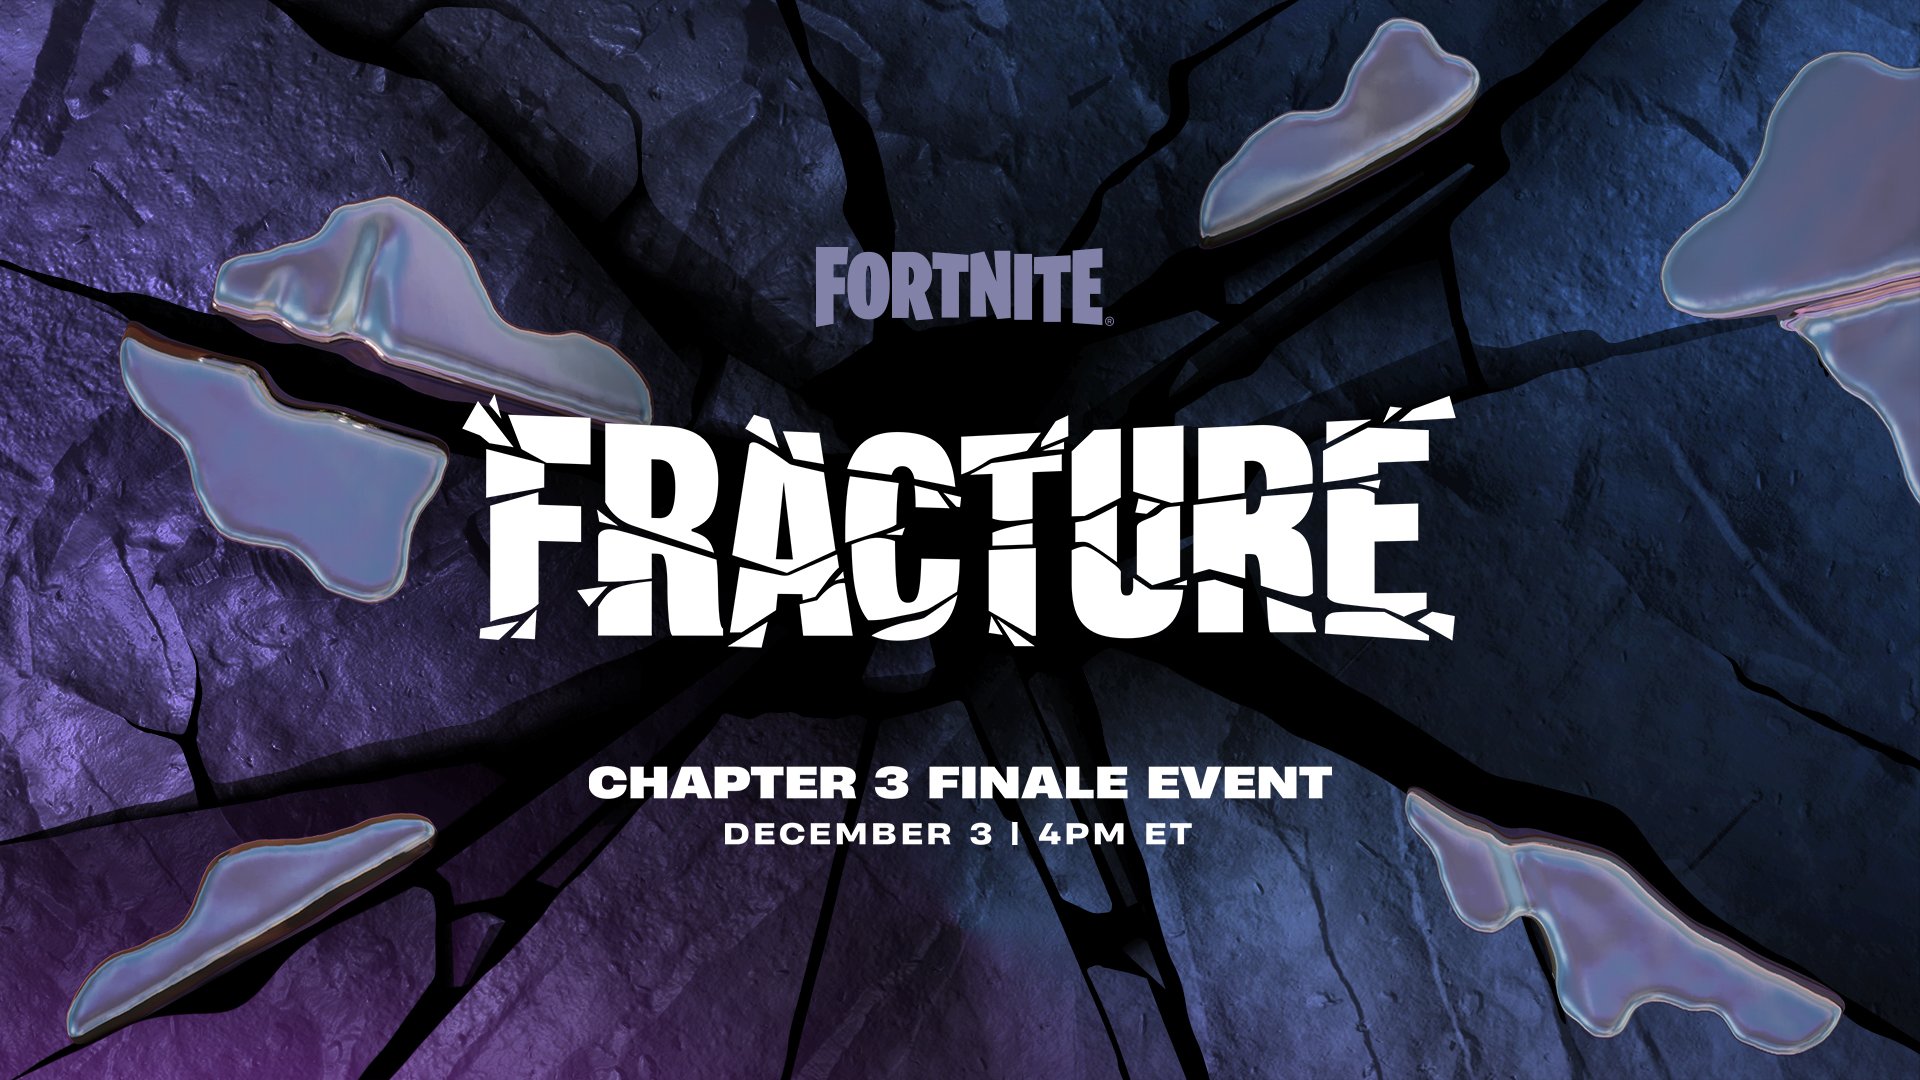 Fortnite Status - 'Fracture' Chapter 3 Finale event starts soon! Please note other playlists will be disabled before 'Fracture' is available